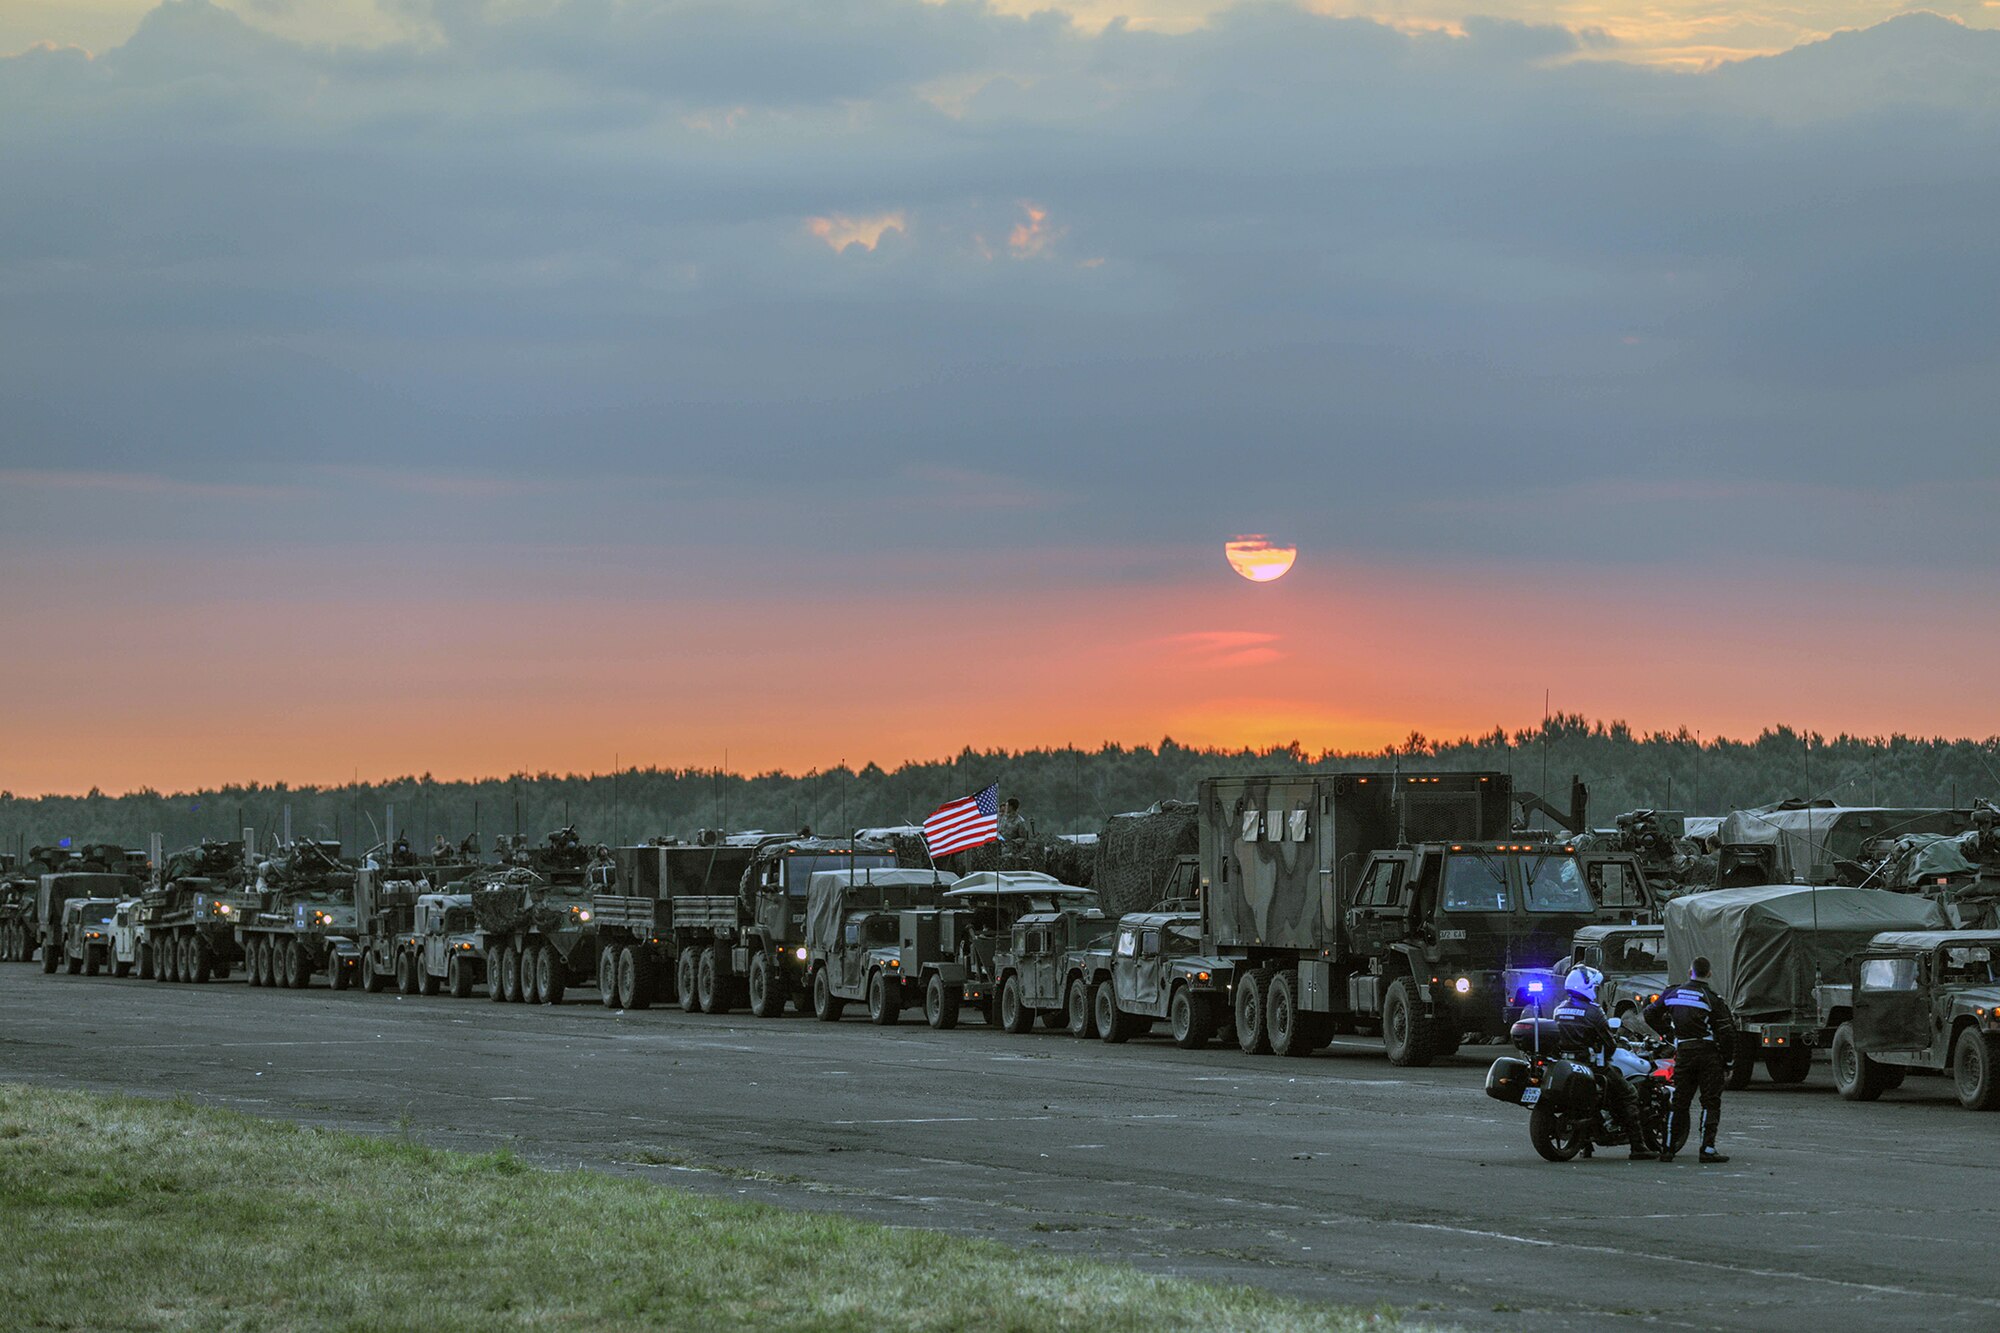 Strykers and military support vehicles belonging to the 3rd Squadron, 2d Cavalry Regiment stage for departure in Sochazcew, Poland, June 18, 2018.